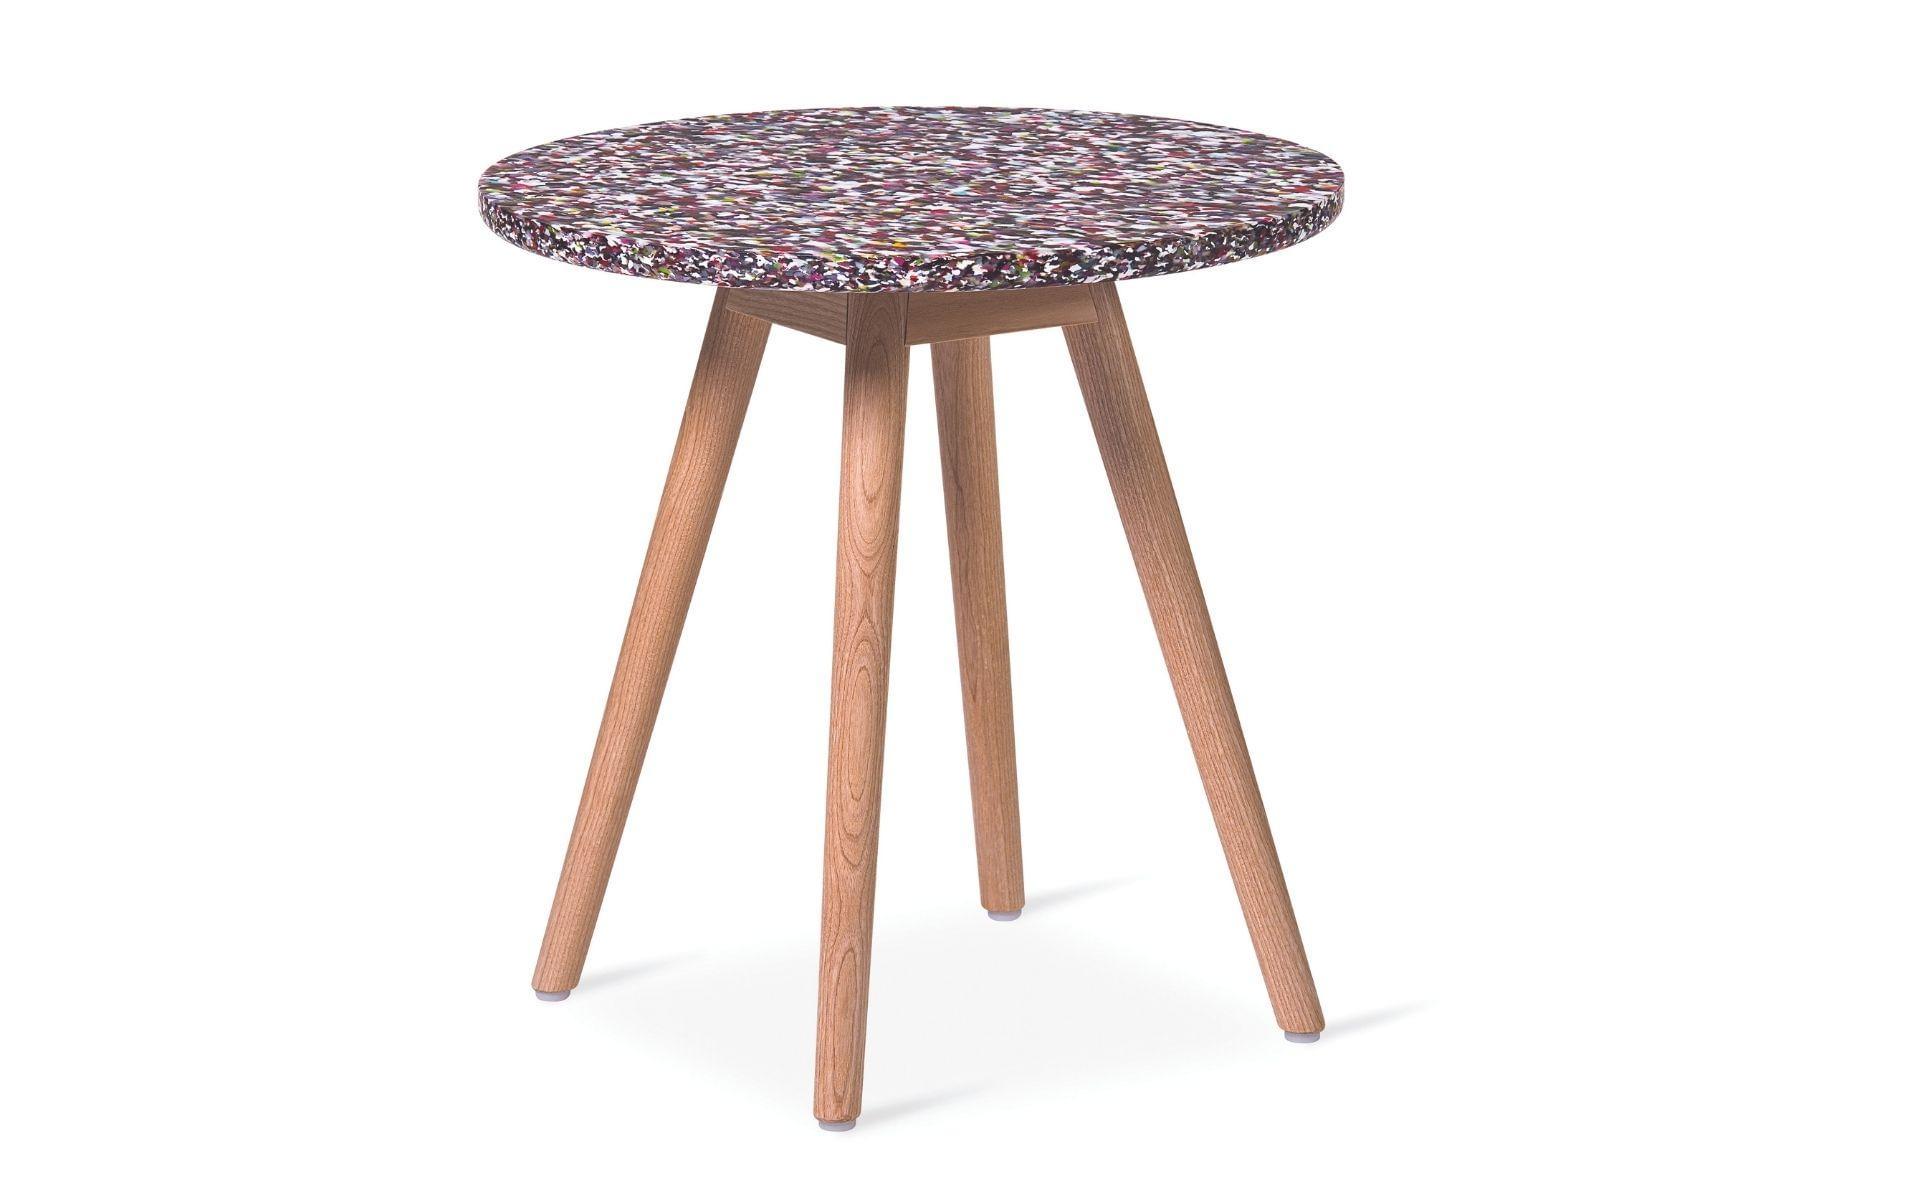 Tables Occasional Scandinavian Spaces T Innef Sustainability3